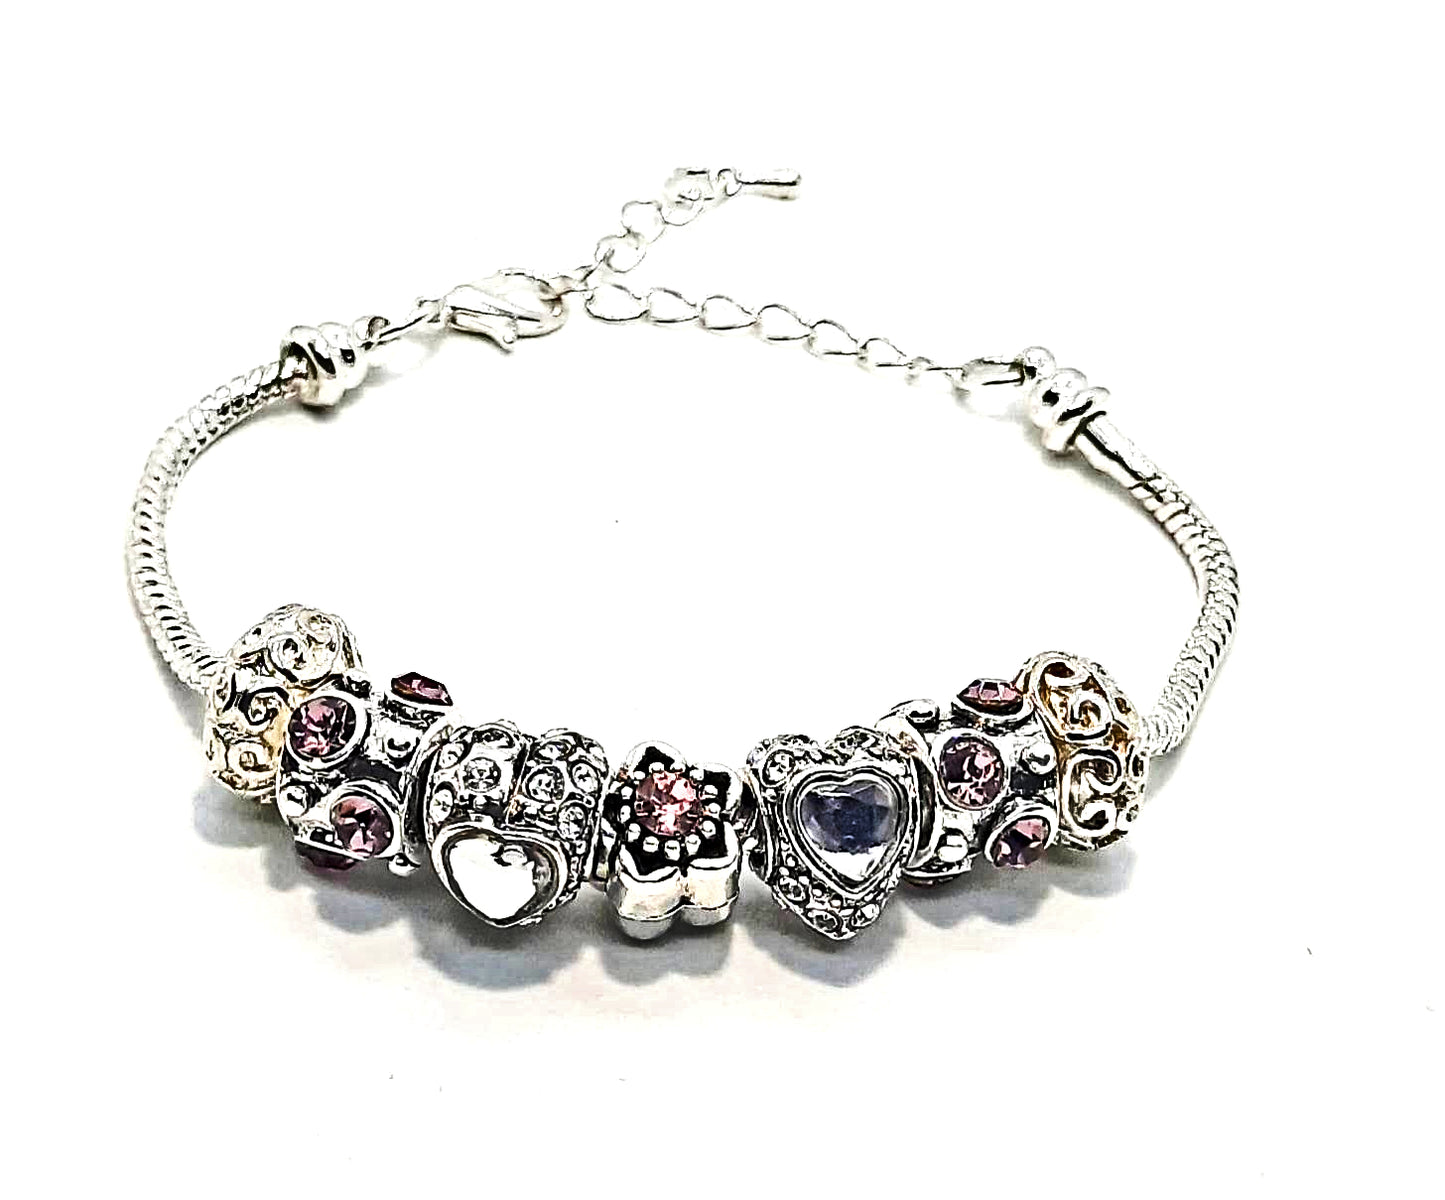 Euro beads light pink silver-plated bracelet